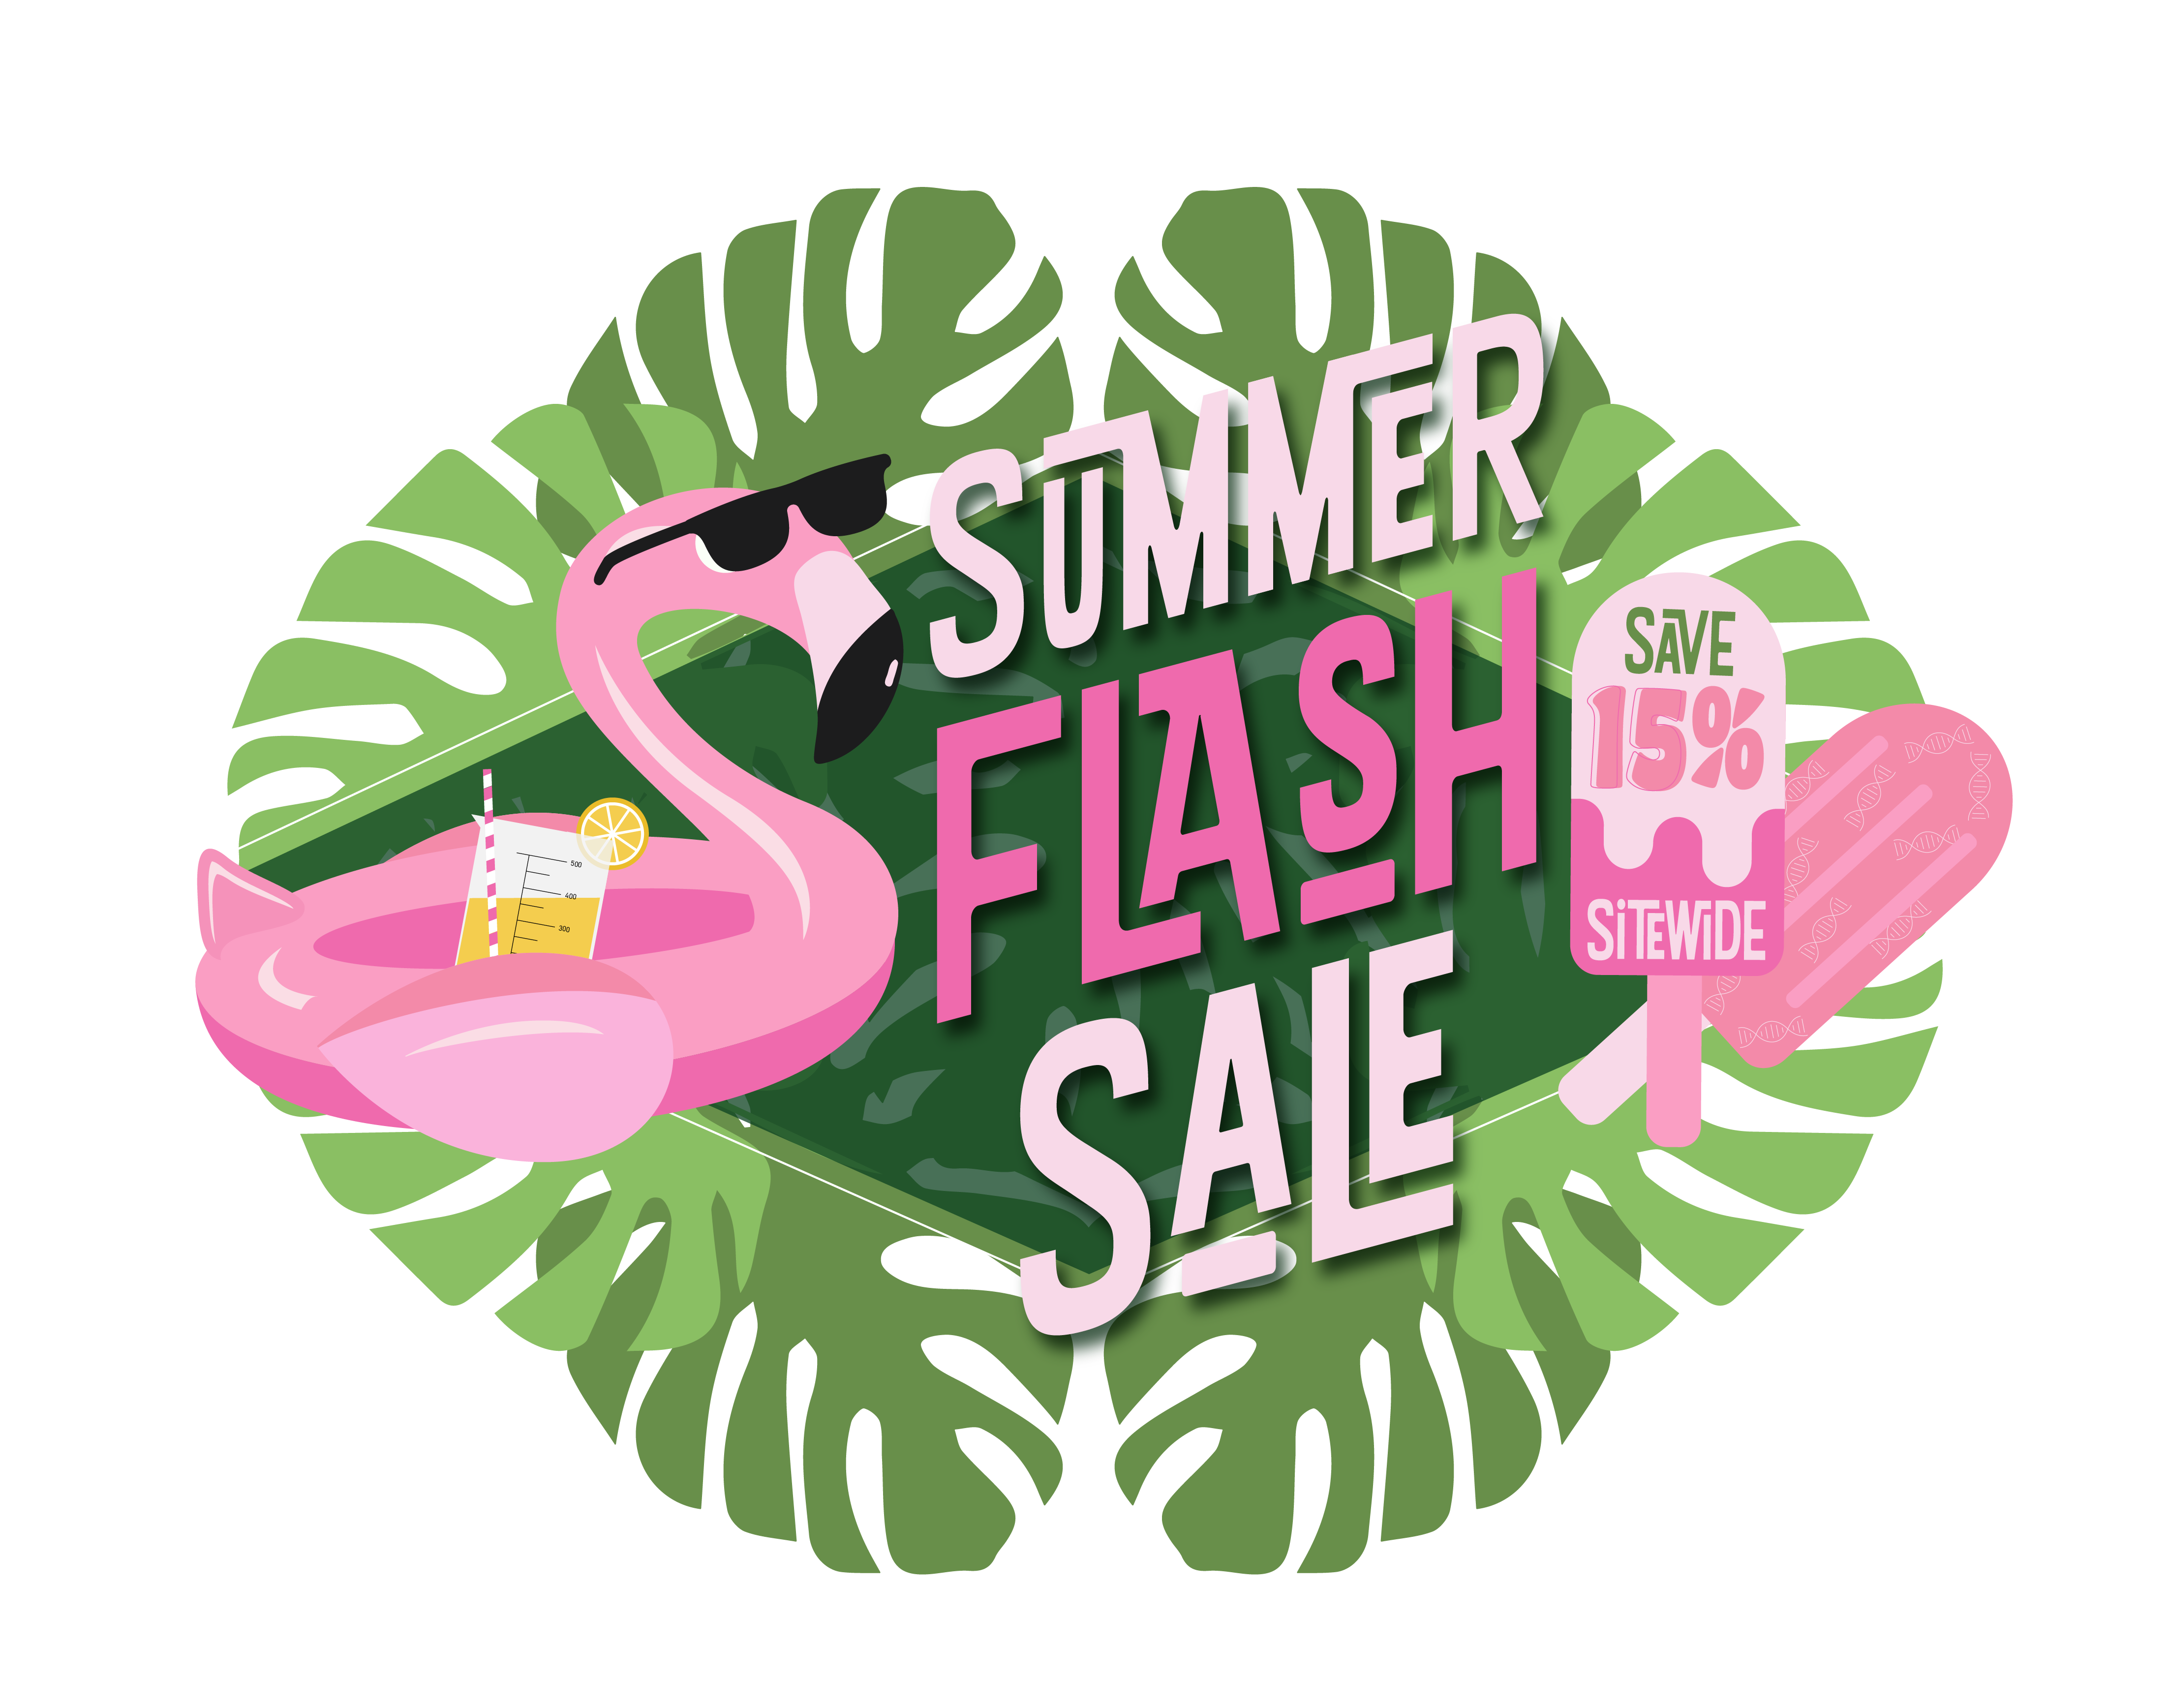 Summer Flash Sale Logo with 15% off Sitewide Savings